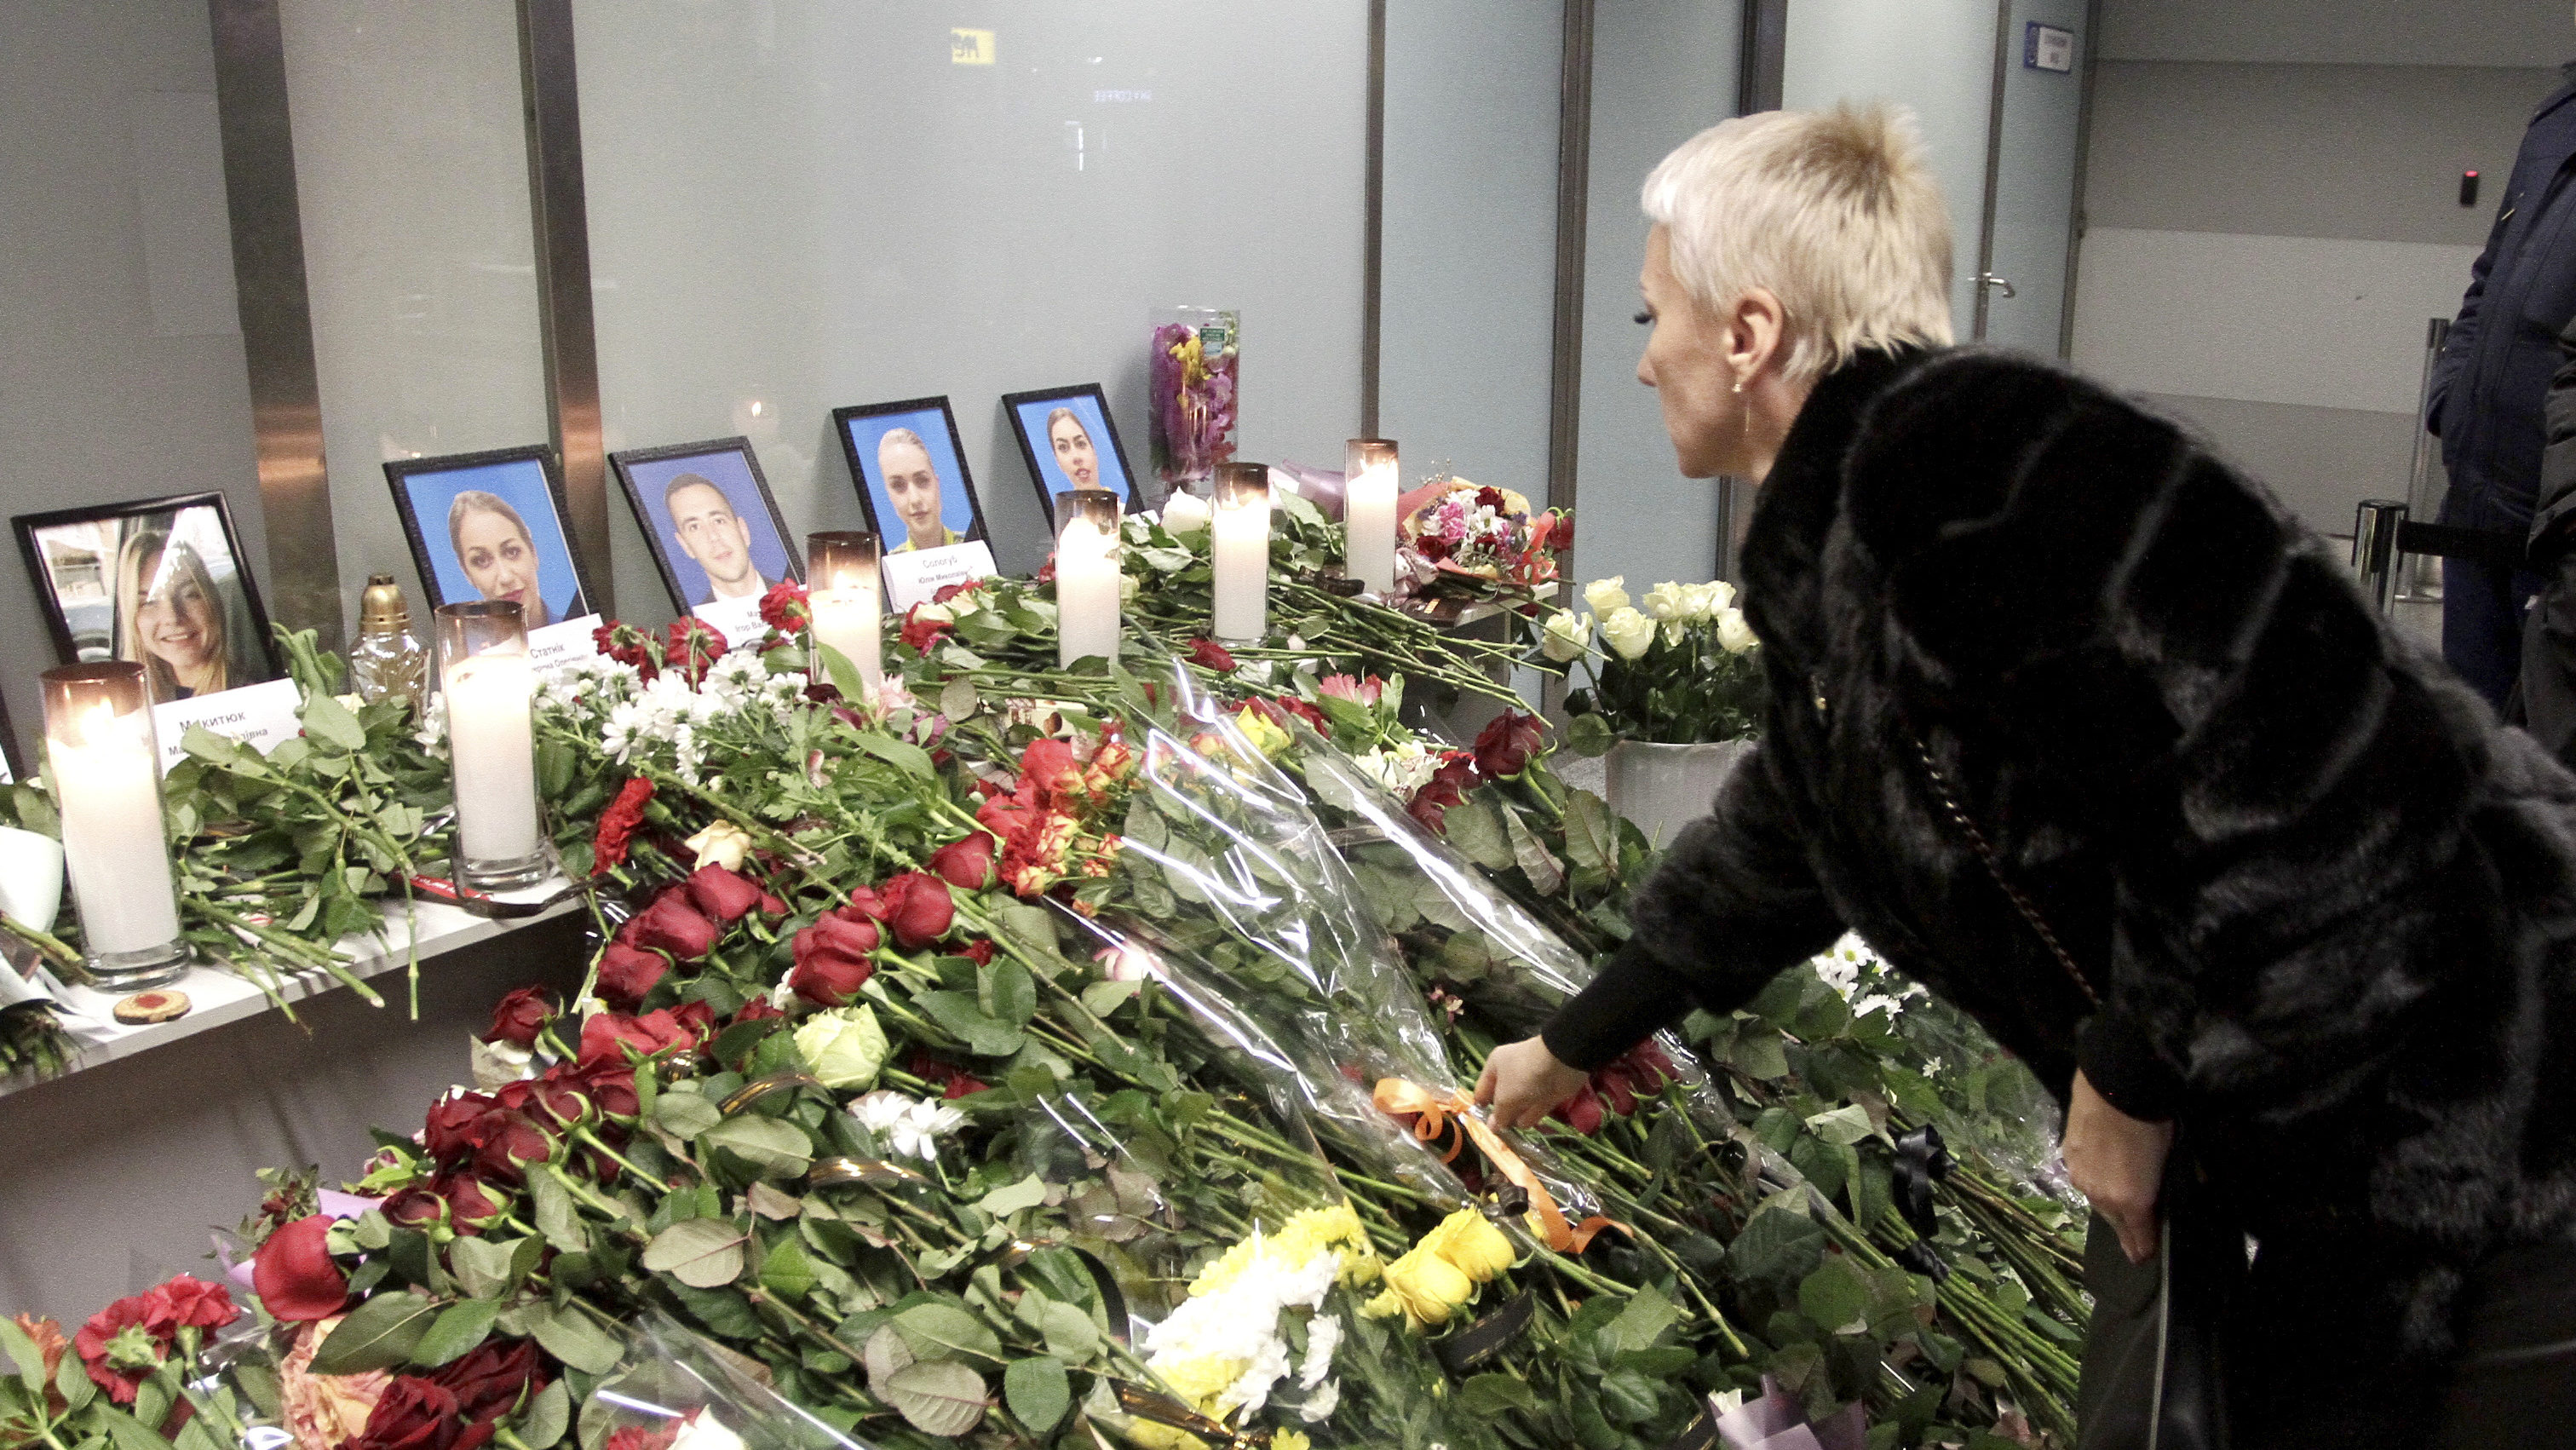 Theory Gaining Traction that Ukraine Airliner was Shot Down